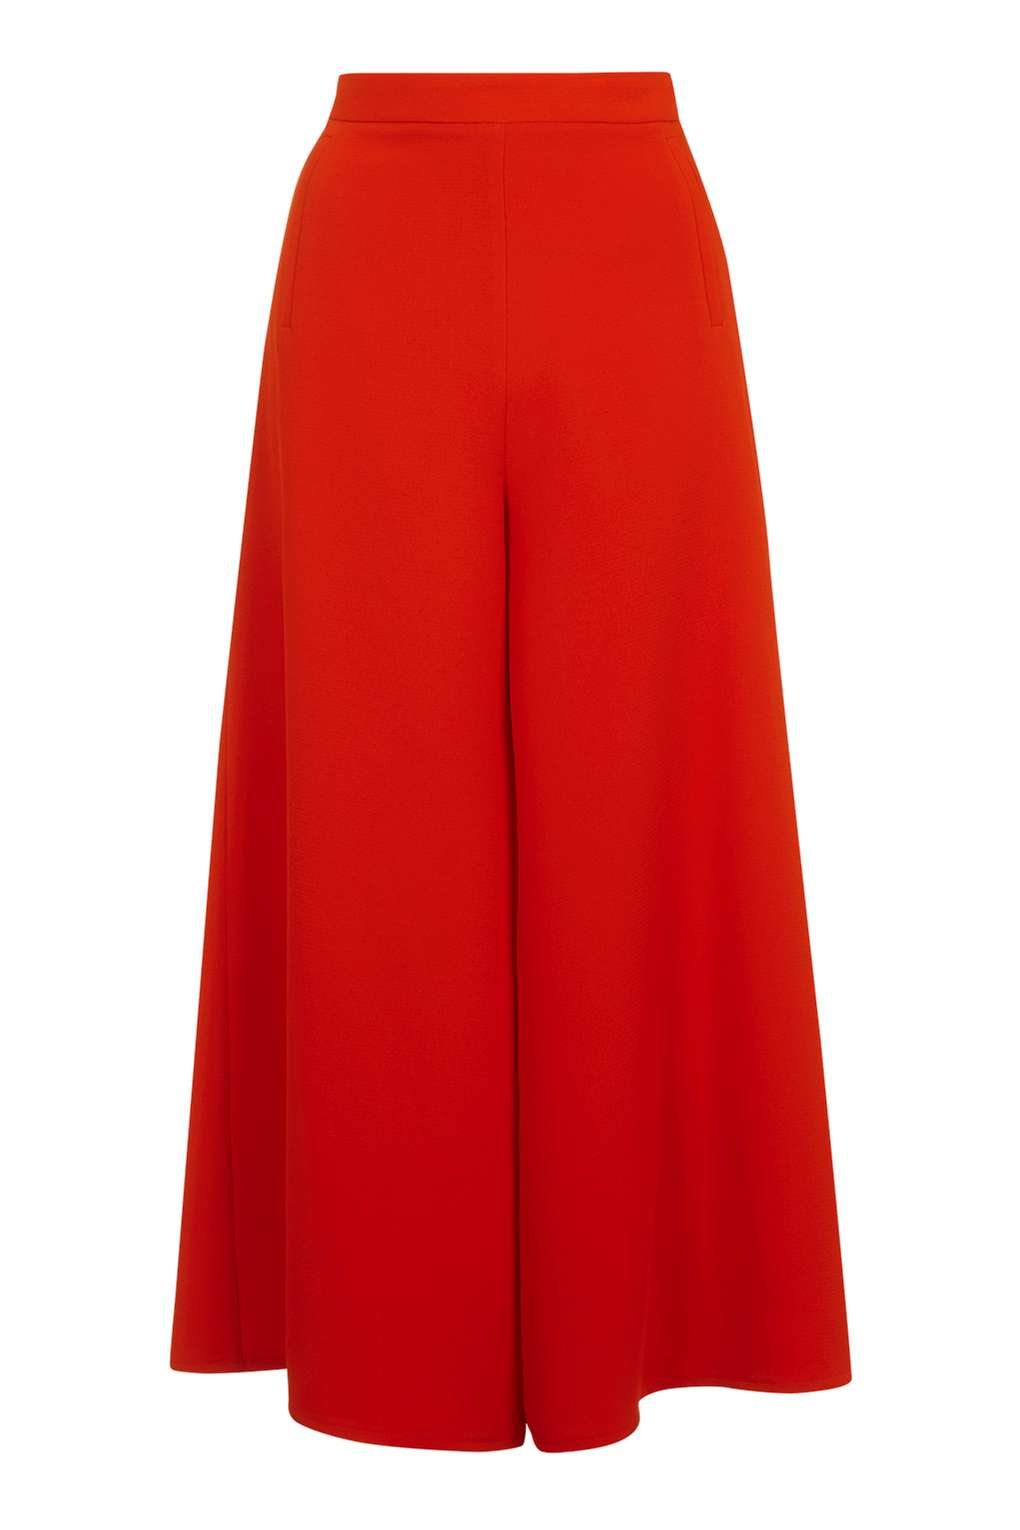 Topshop Wide Leg Palazzo Trousers in Red | Lyst